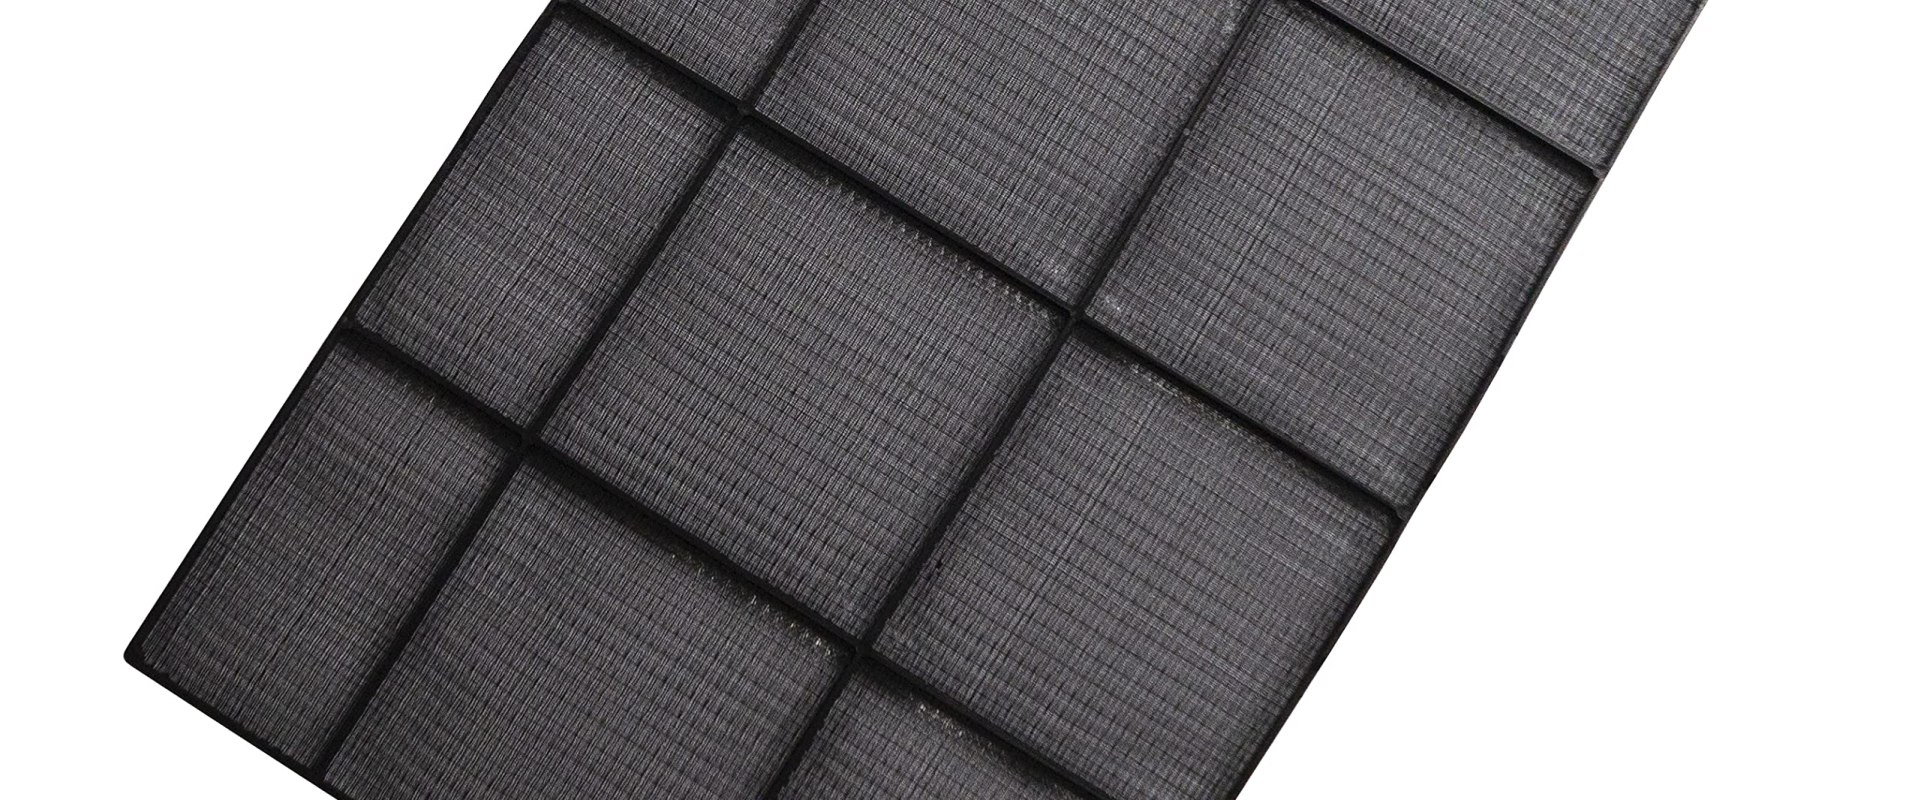 How to Safely Dispose of Used 14x18x1 Air Filters